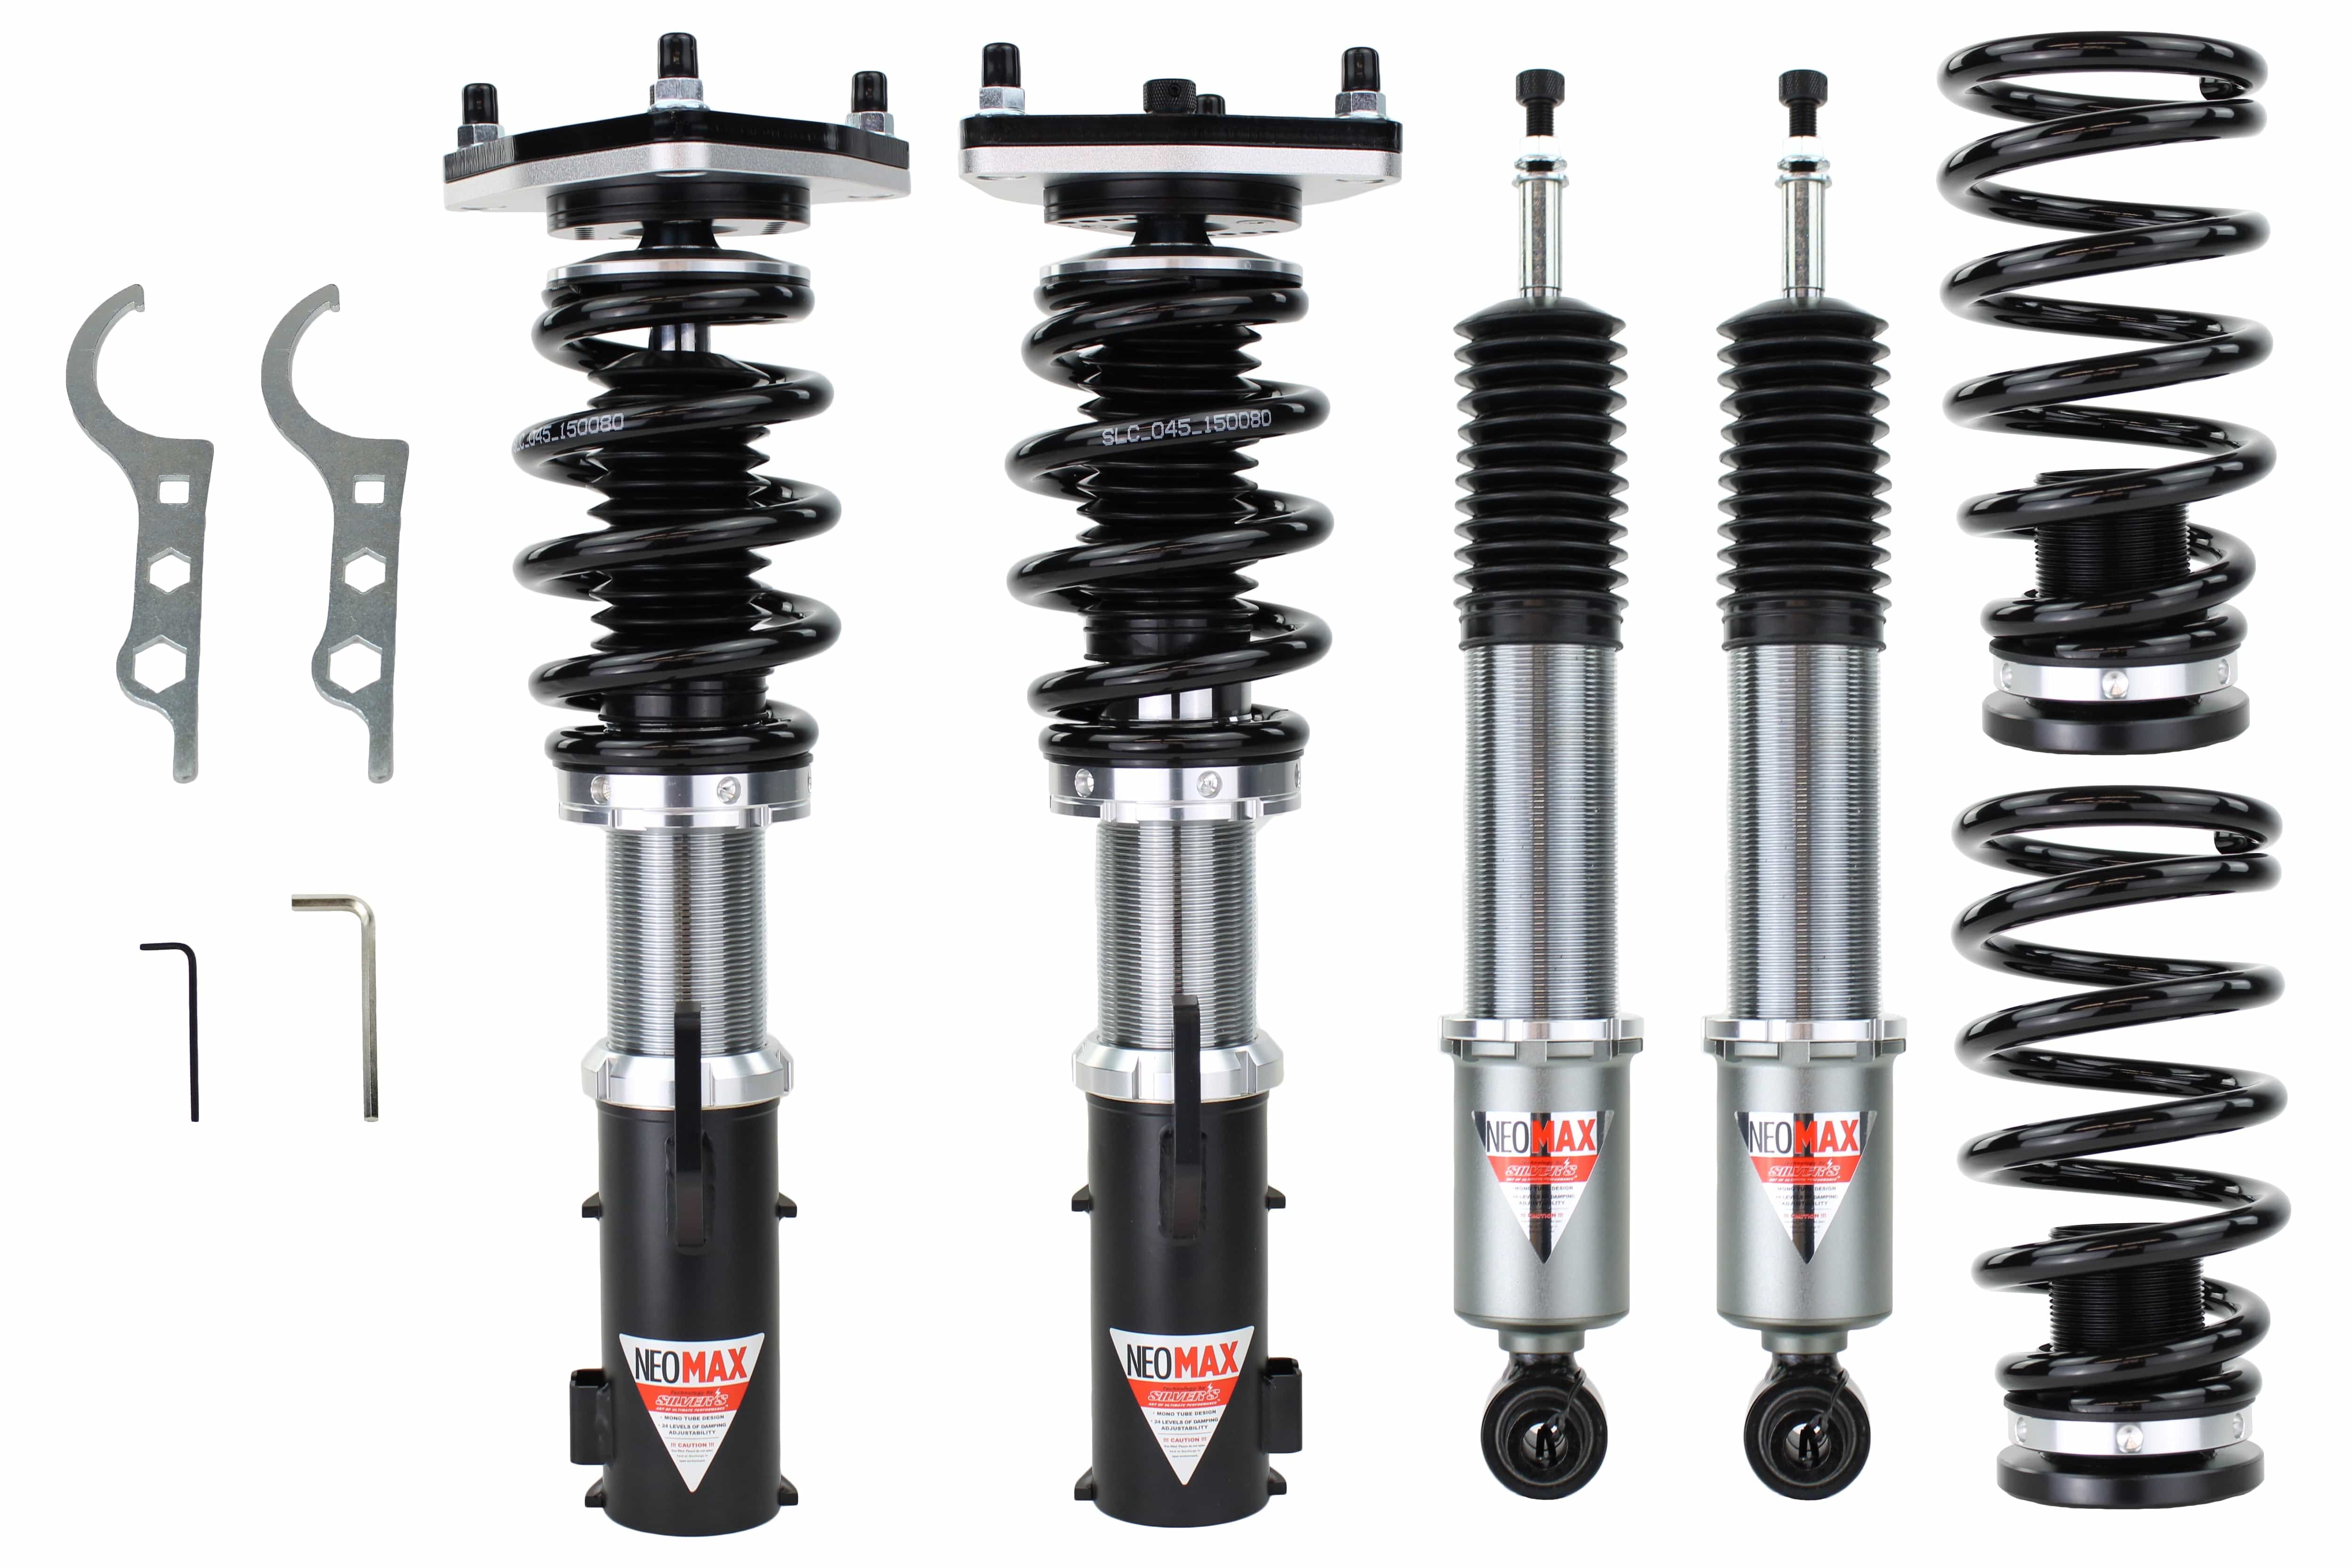 Silvers NEOMAX Coilovers for 2013-2016 Hyundai Genesis Coupe (Gen 2)